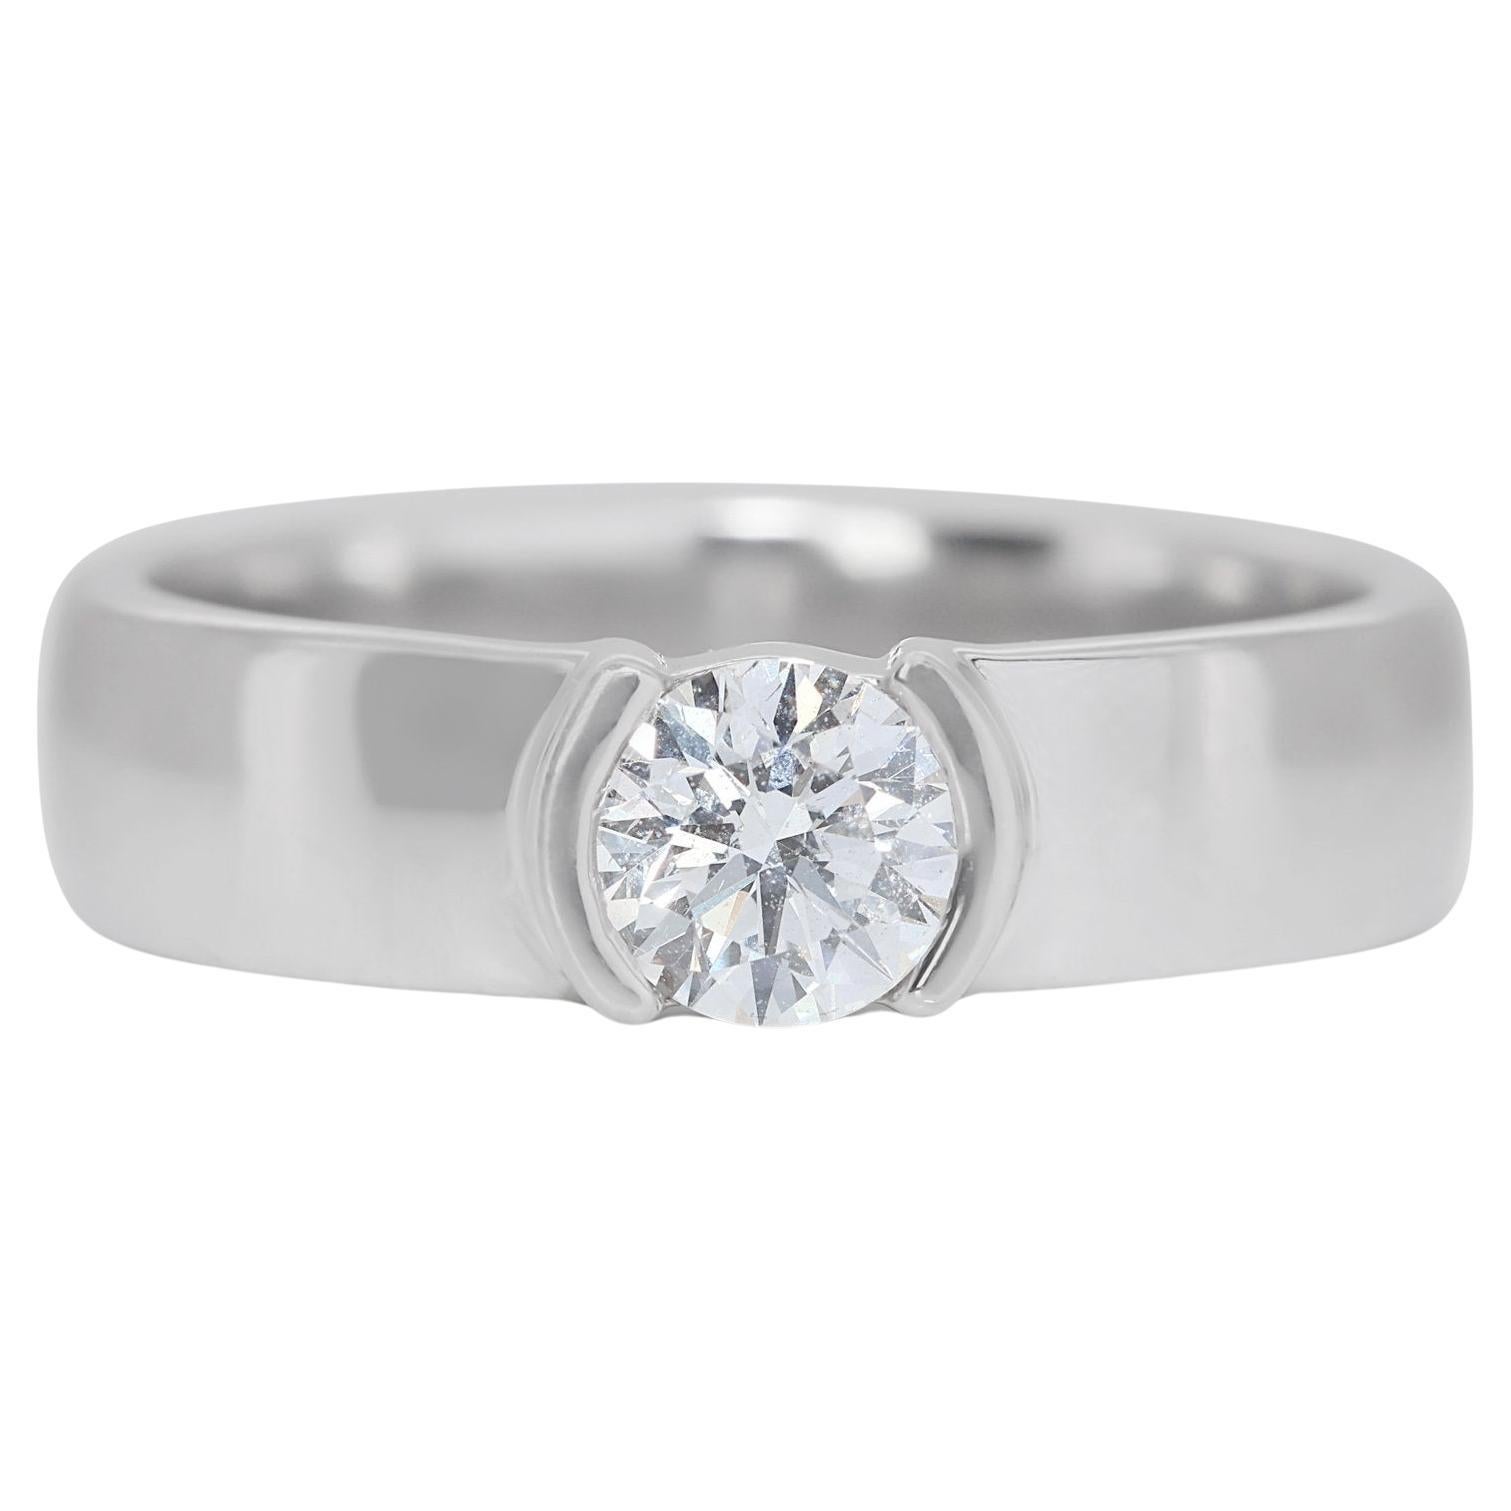 Sophisticated 0.70ct Diamond Solitaire Ring in 18k White Gold - GIA Certified For Sale